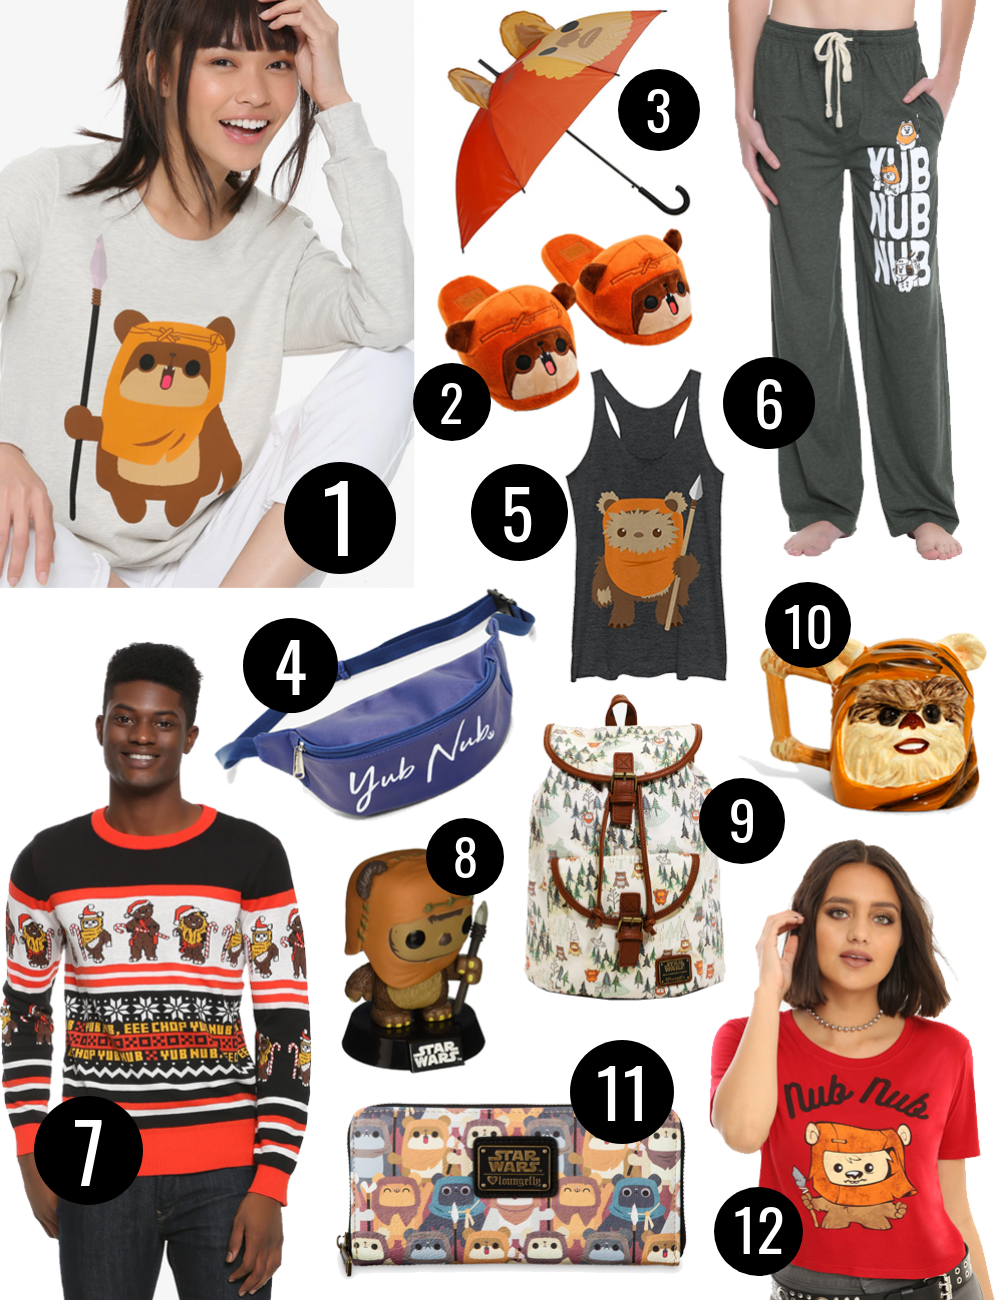 Star Wars Ewok Gift Guide // The Geeky Fashionista